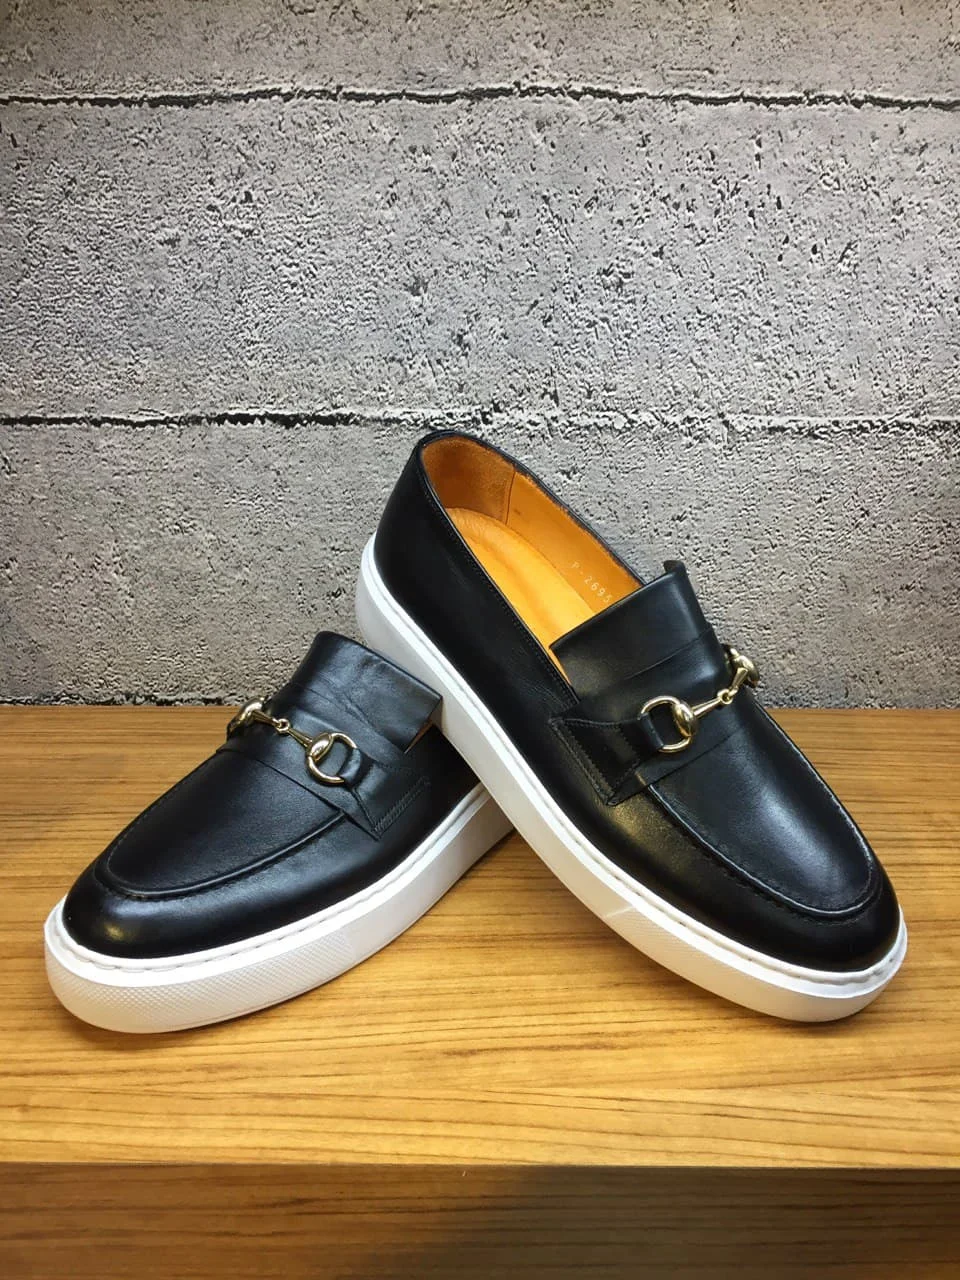 

Handmade Slip On Black Loafers with Lightweight EVA Sole, Full Leather Insole, Genuine Calfskin, Casual Men's Comfort Shoes